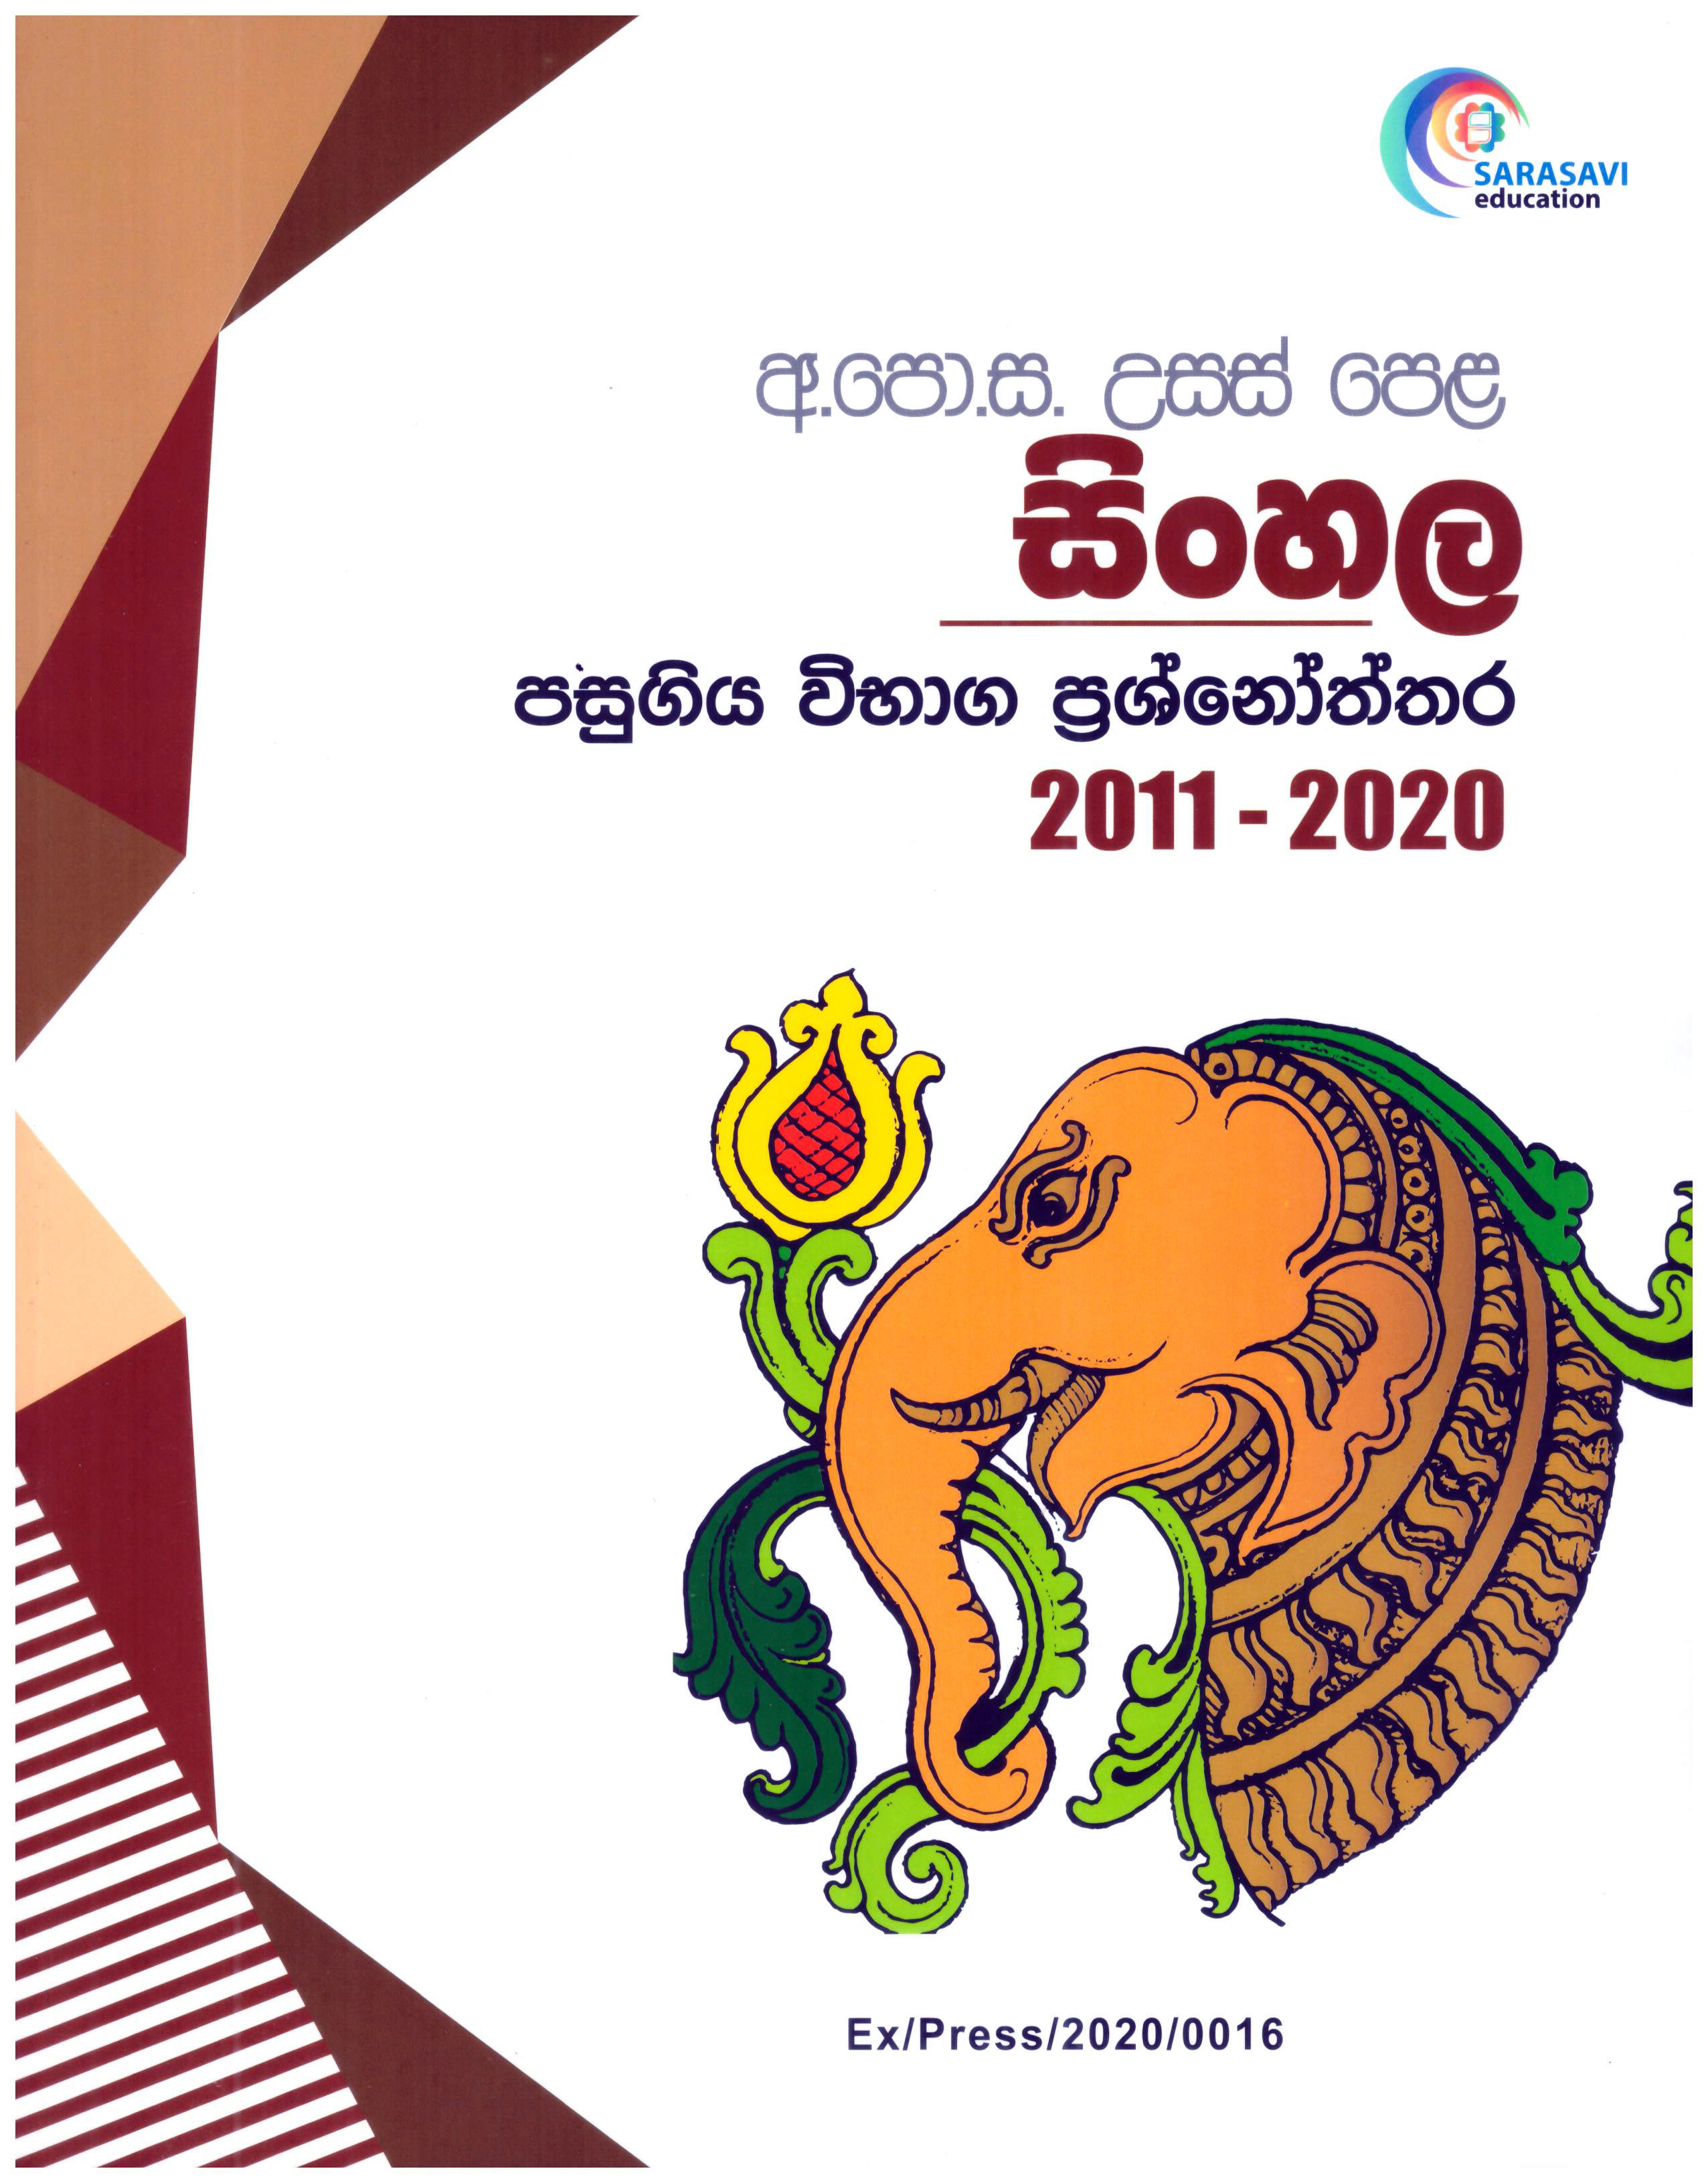 Sarasavi A/L Sinhala ( Past Papers Questions and Answers 2011 - 2020 )